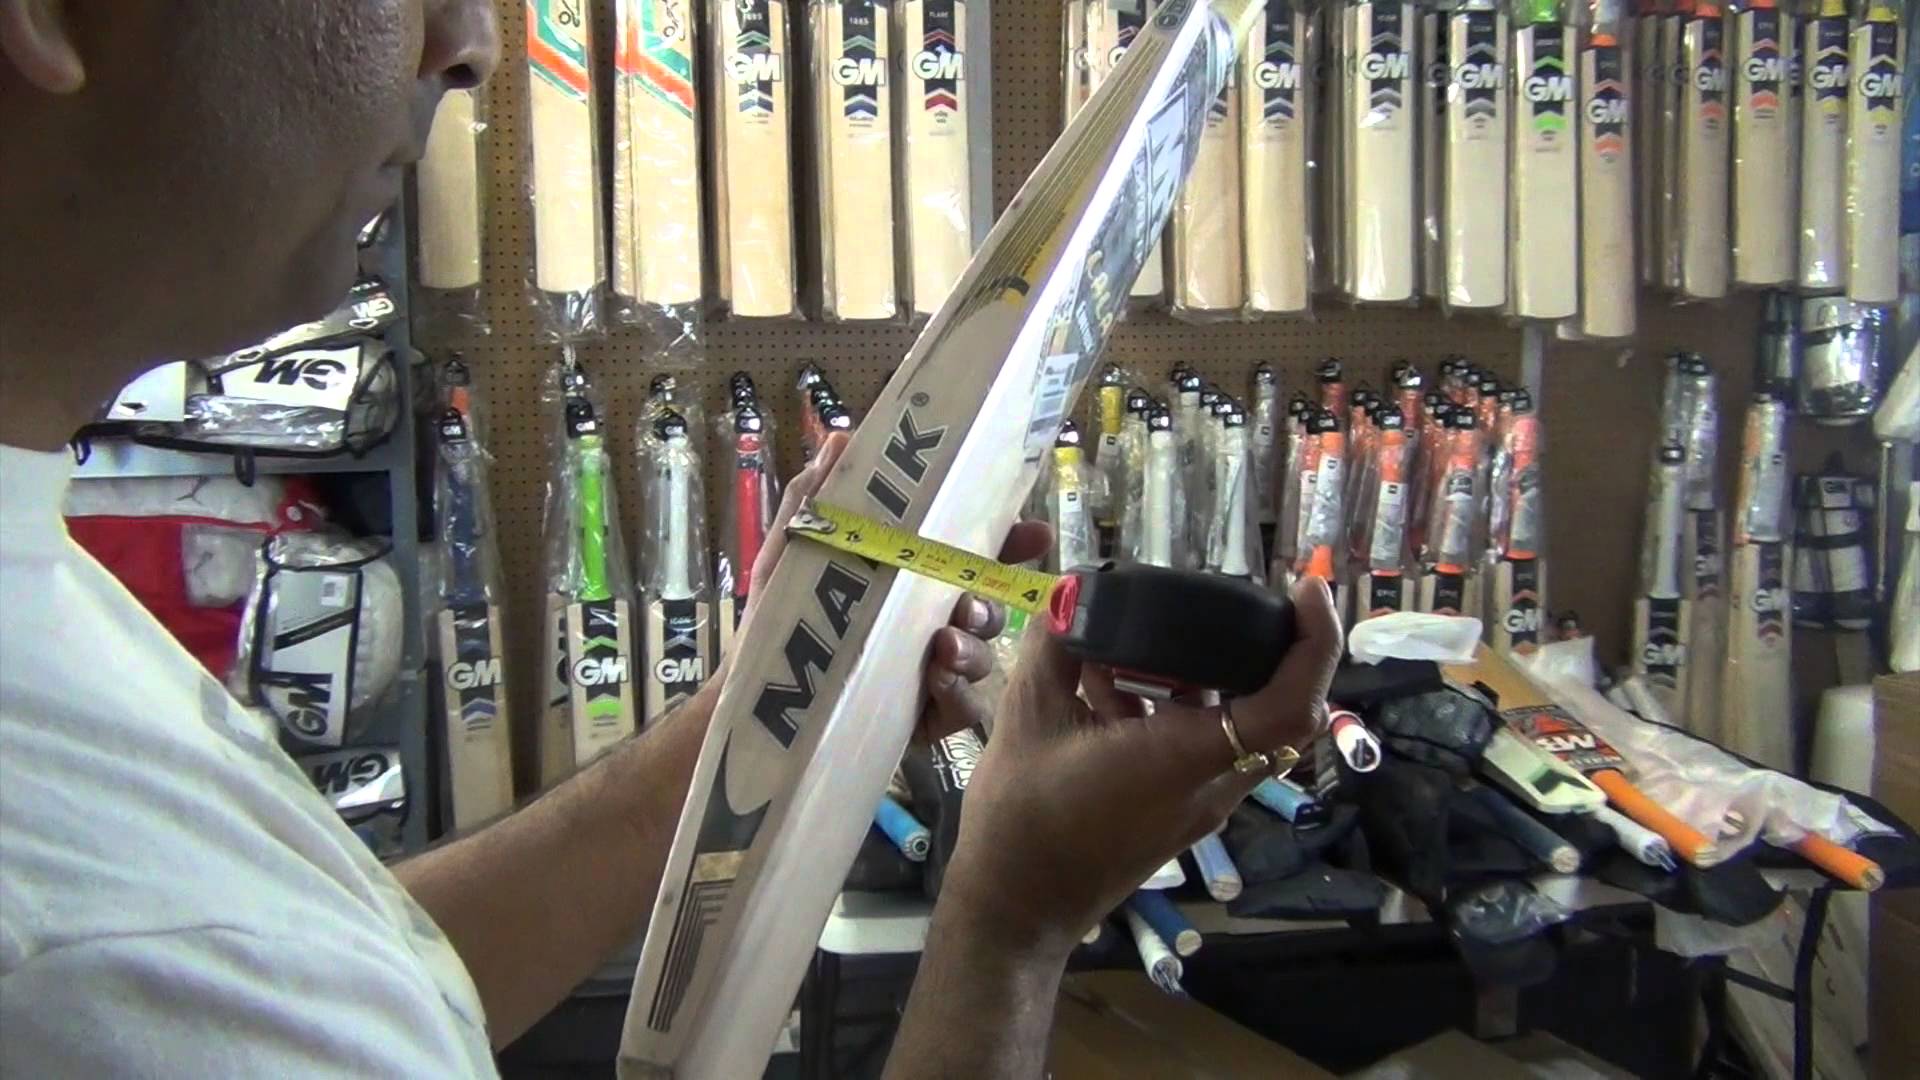 How to select the cricket bat